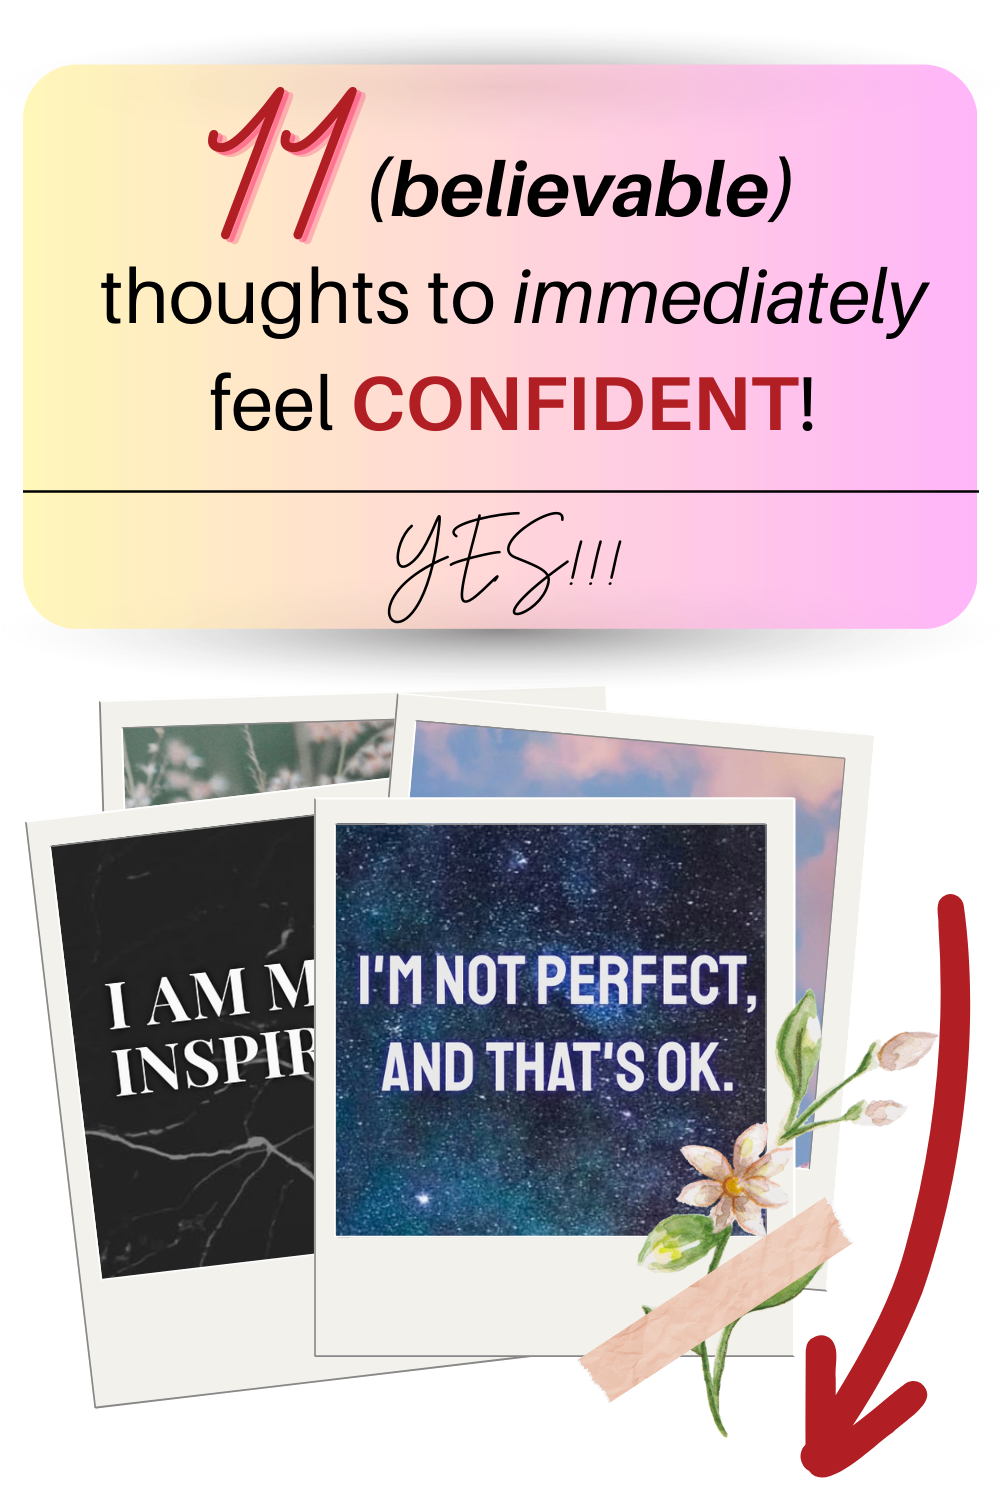 Image with written on top 11 believable thoughts to immediately feel confident, there is a "yes" button, a few quotes below and an arrow that points at a form